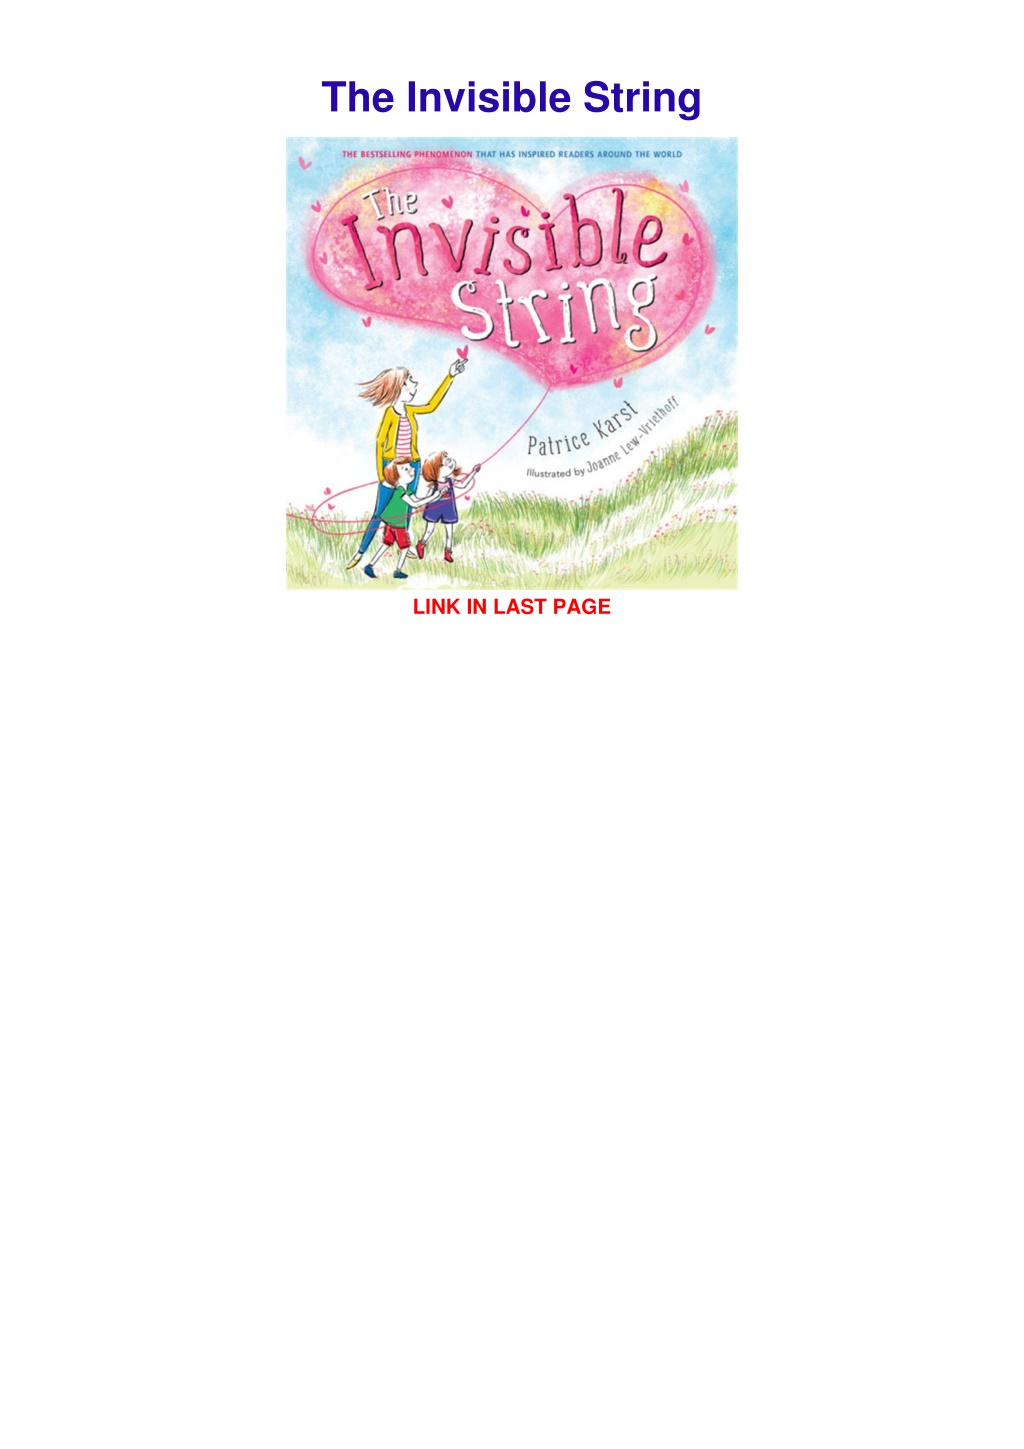 You Are Never Alone: An Invisible String Lullaby (The Invisible